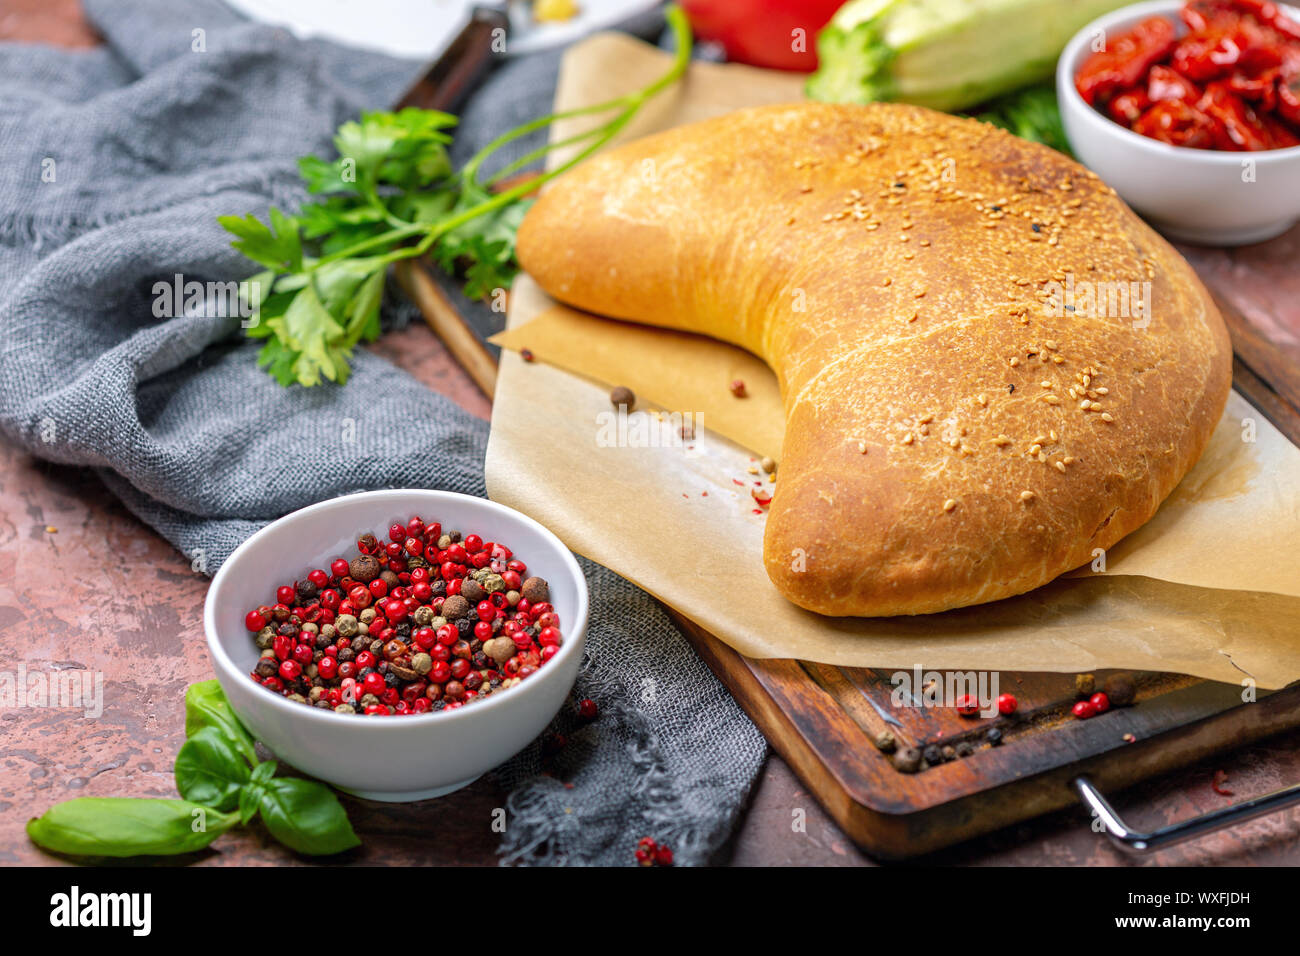 Homemade pizza calzone on a wooden board. Stock Photo